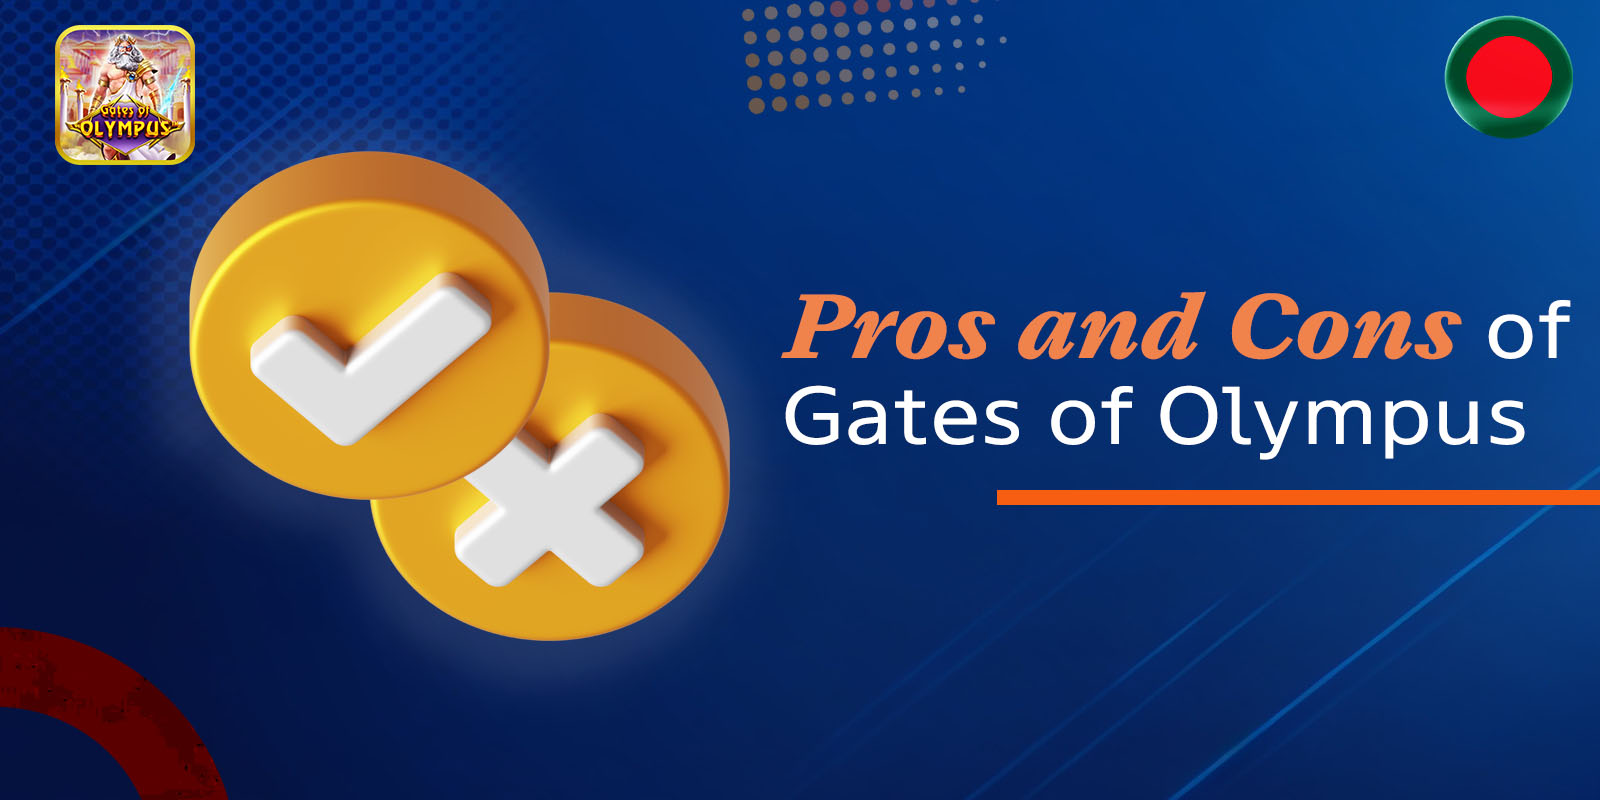 Pros and Cons of Gates of Olympus